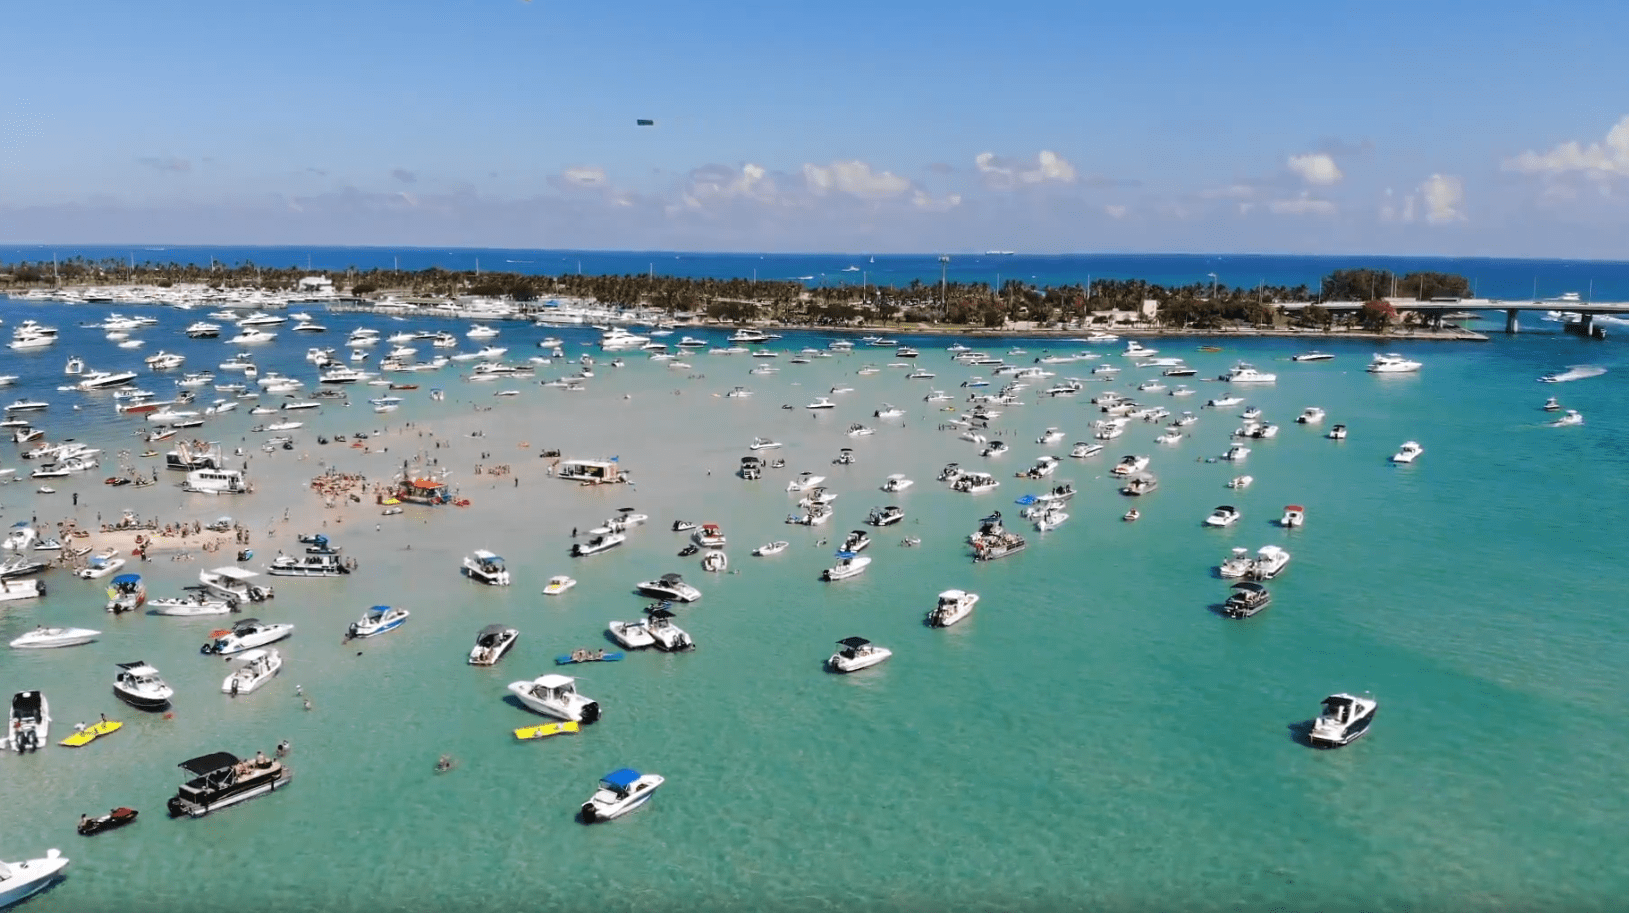 Join the party on the Haulover Sandbar. 